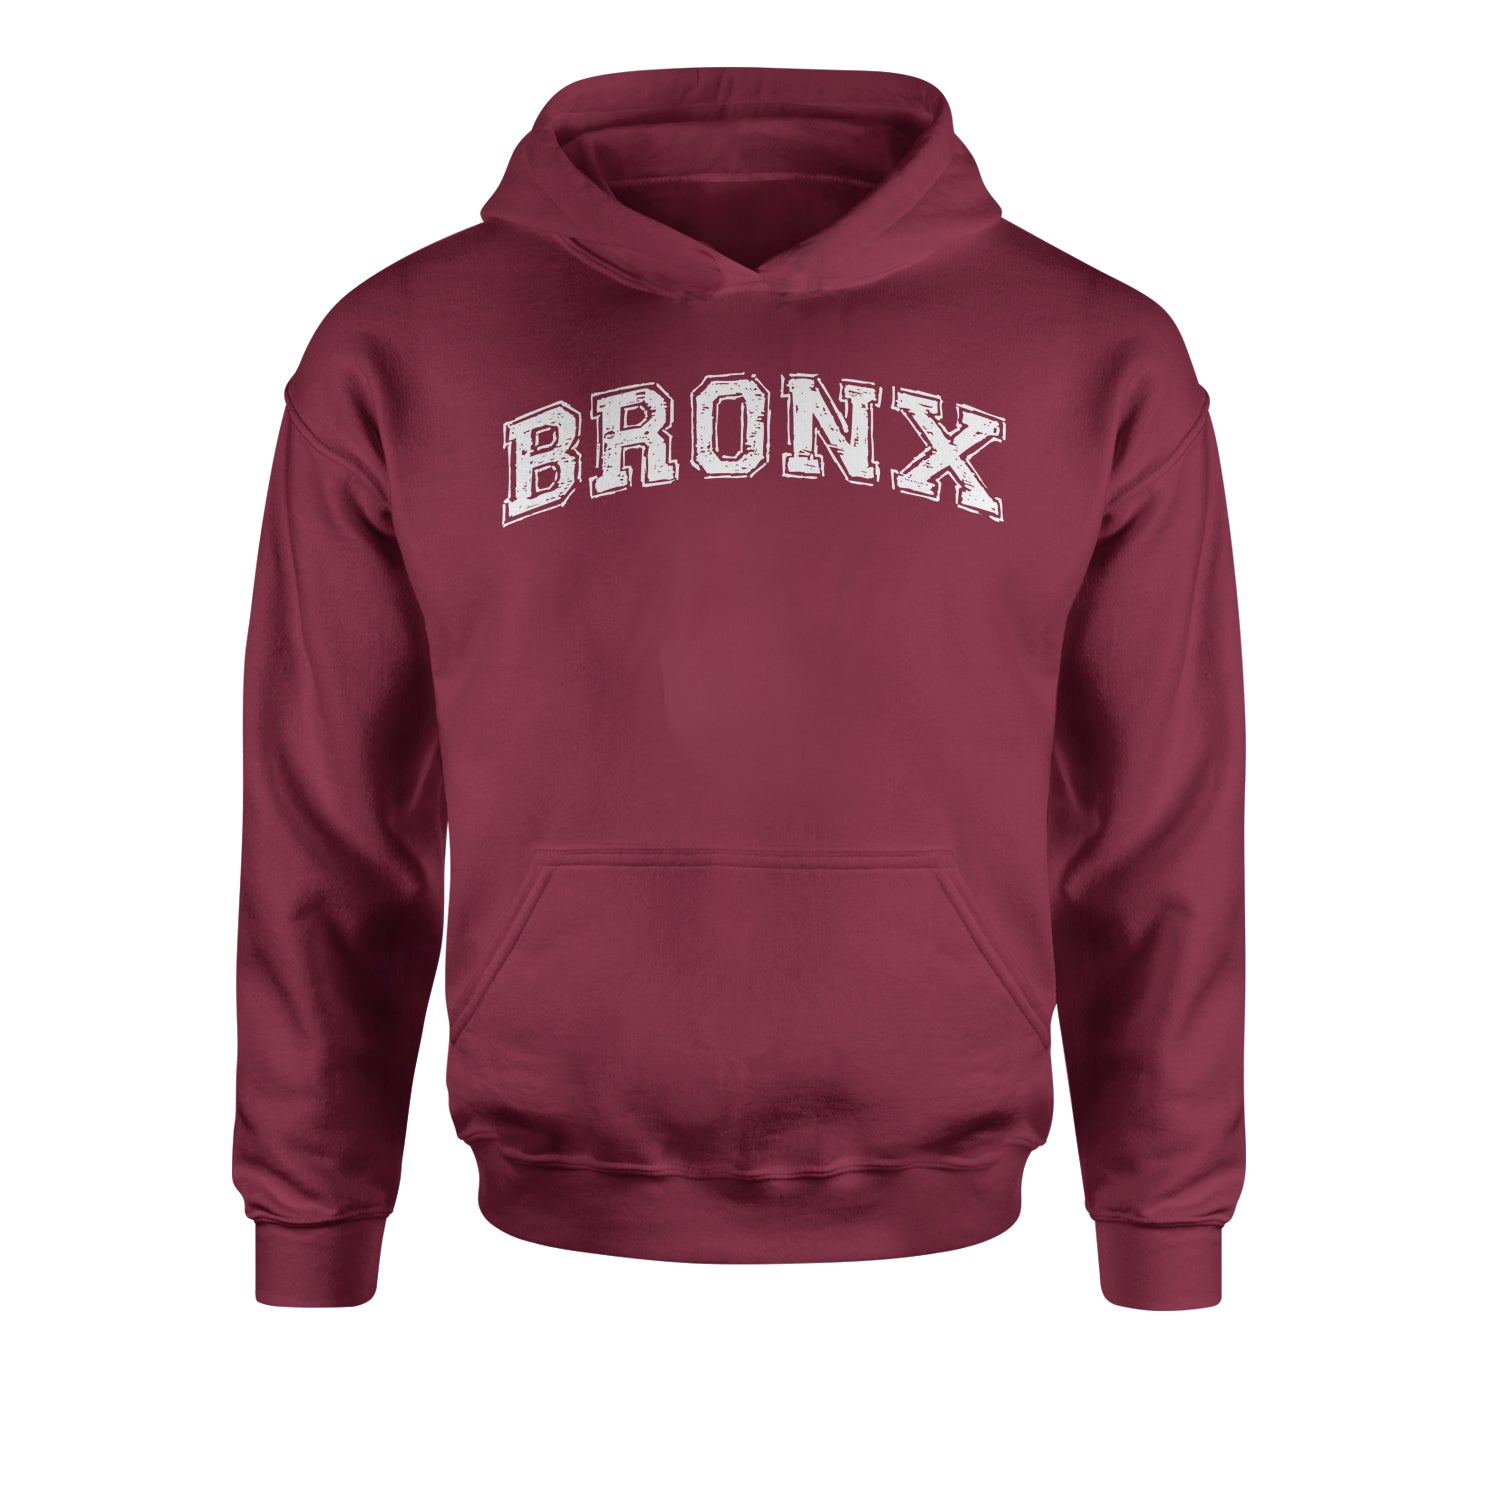 Bronx - From The Block Youth-Sized Hoodie b, cardi, concert, its, Jennifer, lopez, merch, my, party, tour by Expression Tees